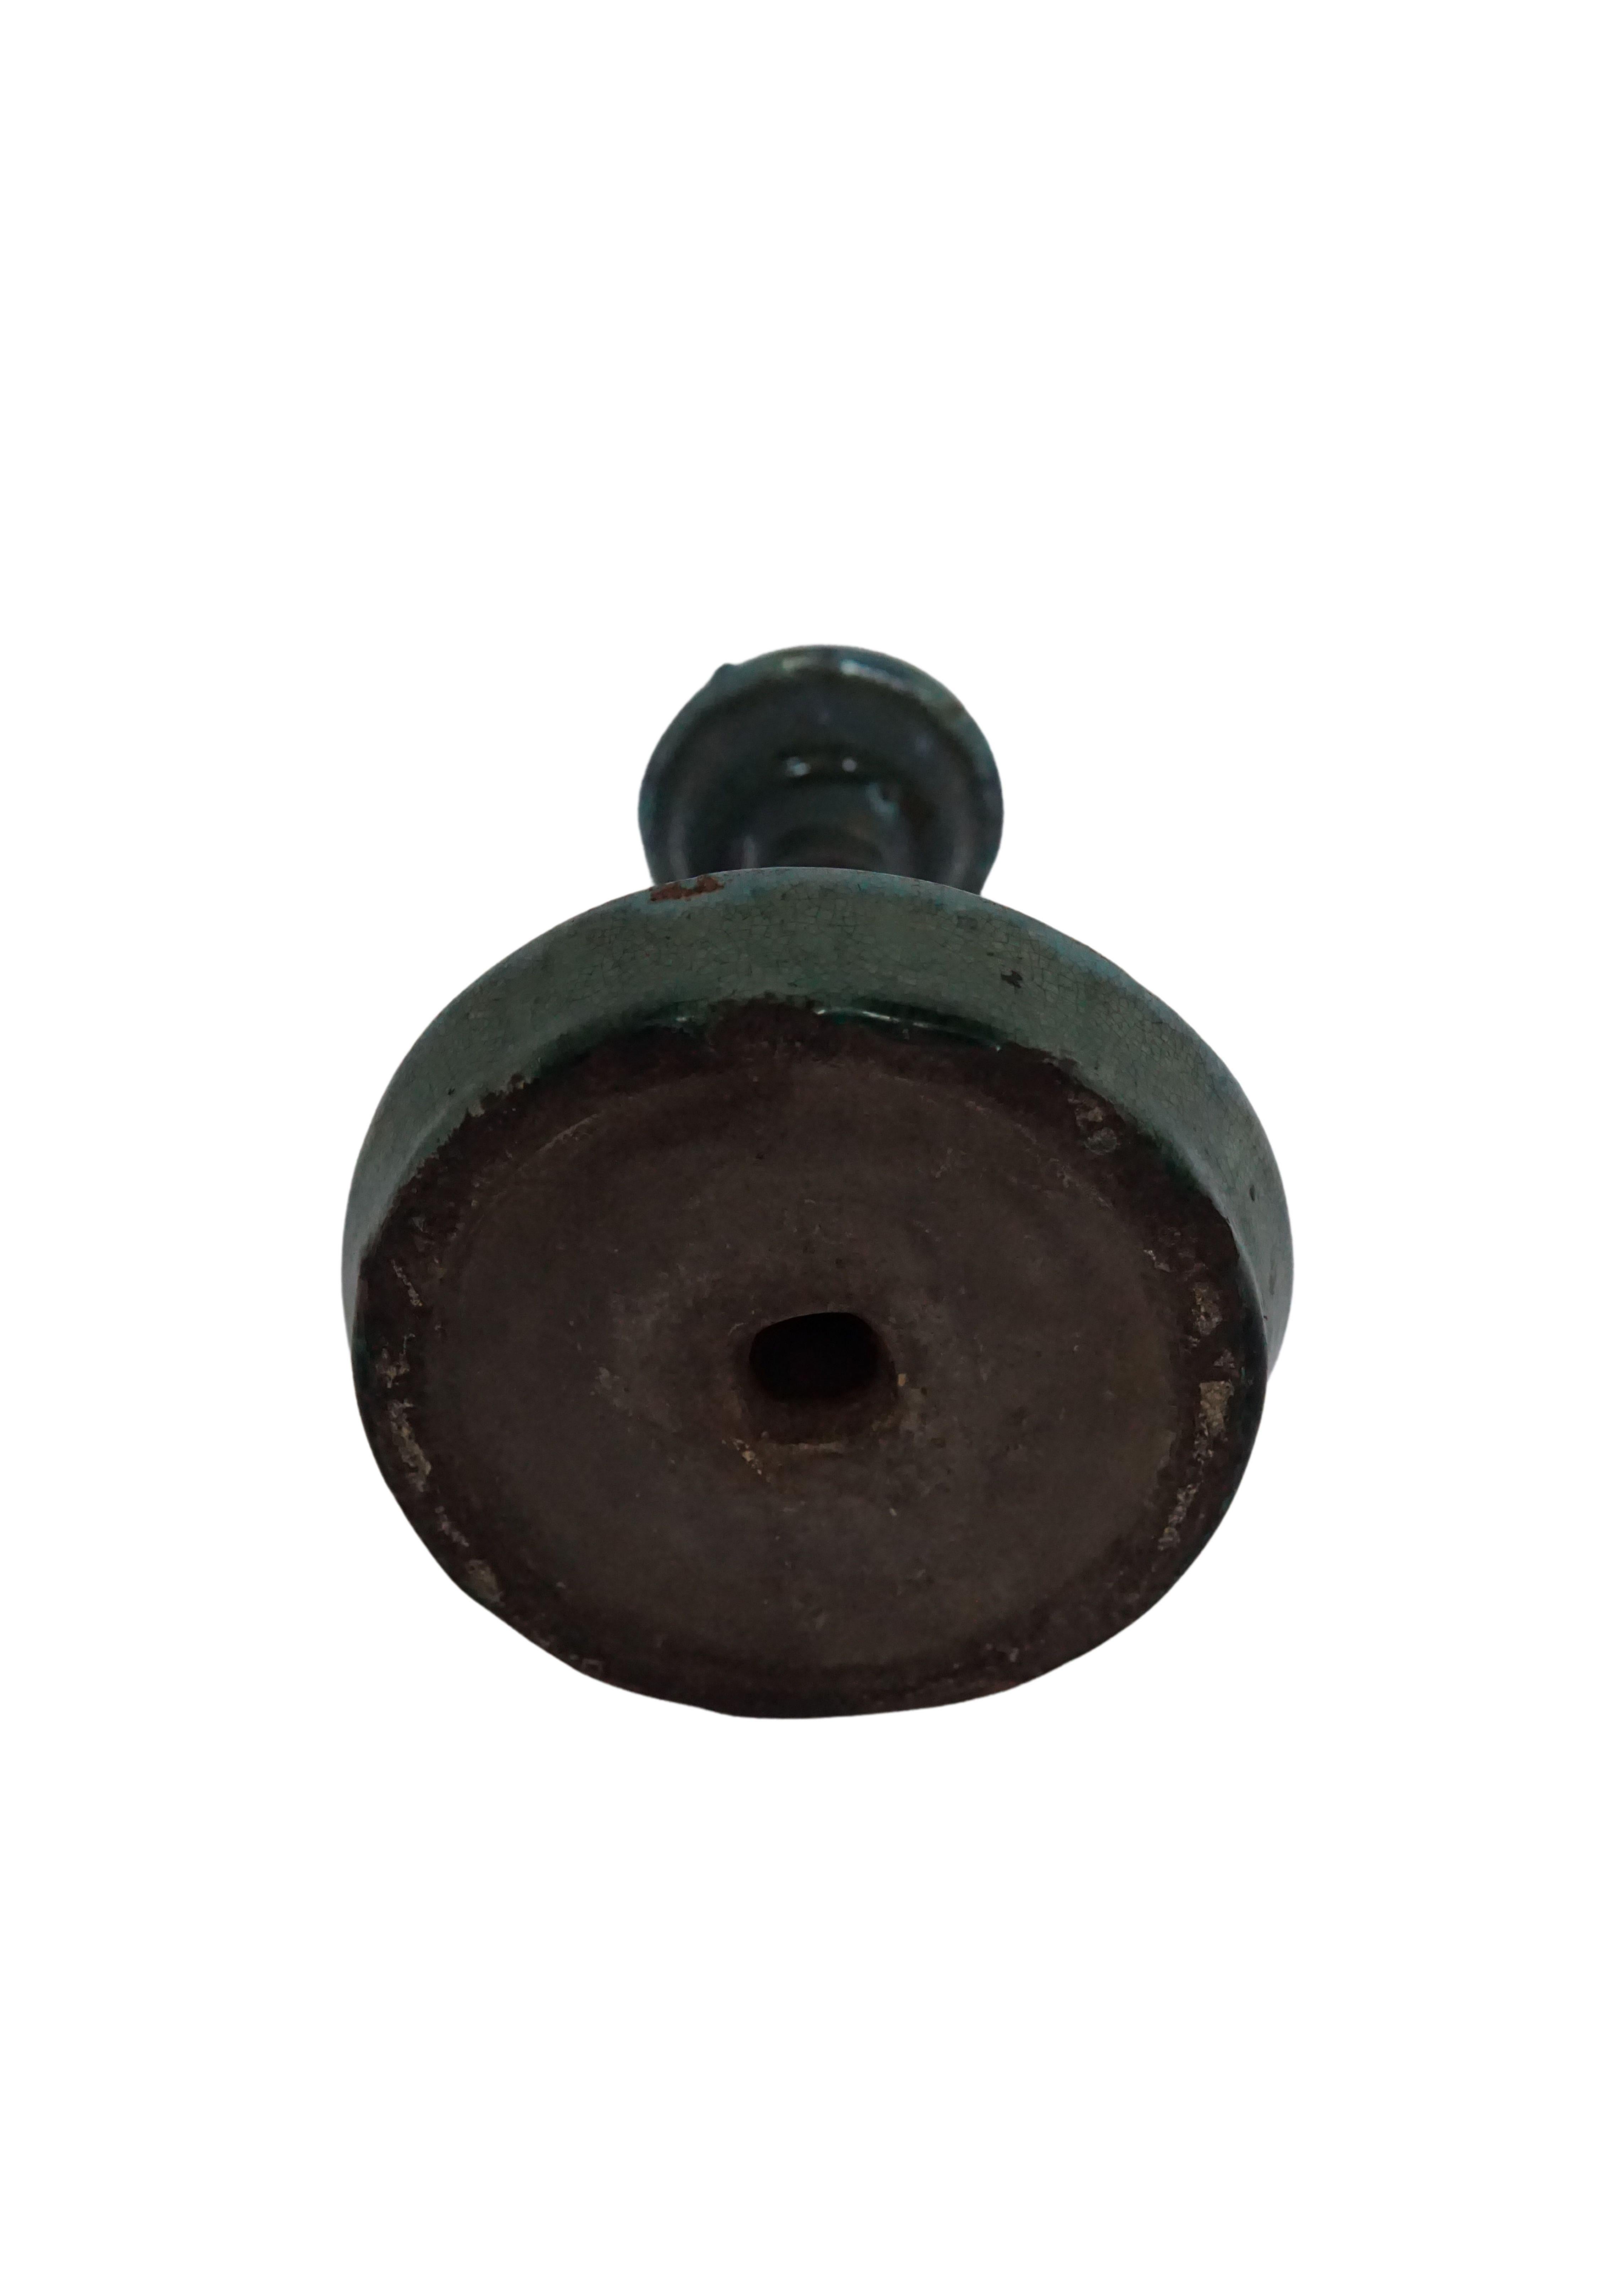 Glazed Chinese Ceramic 'Shiwan' Oil Lamp / Candle Holder, Green Glaze, c. 1900 For Sale